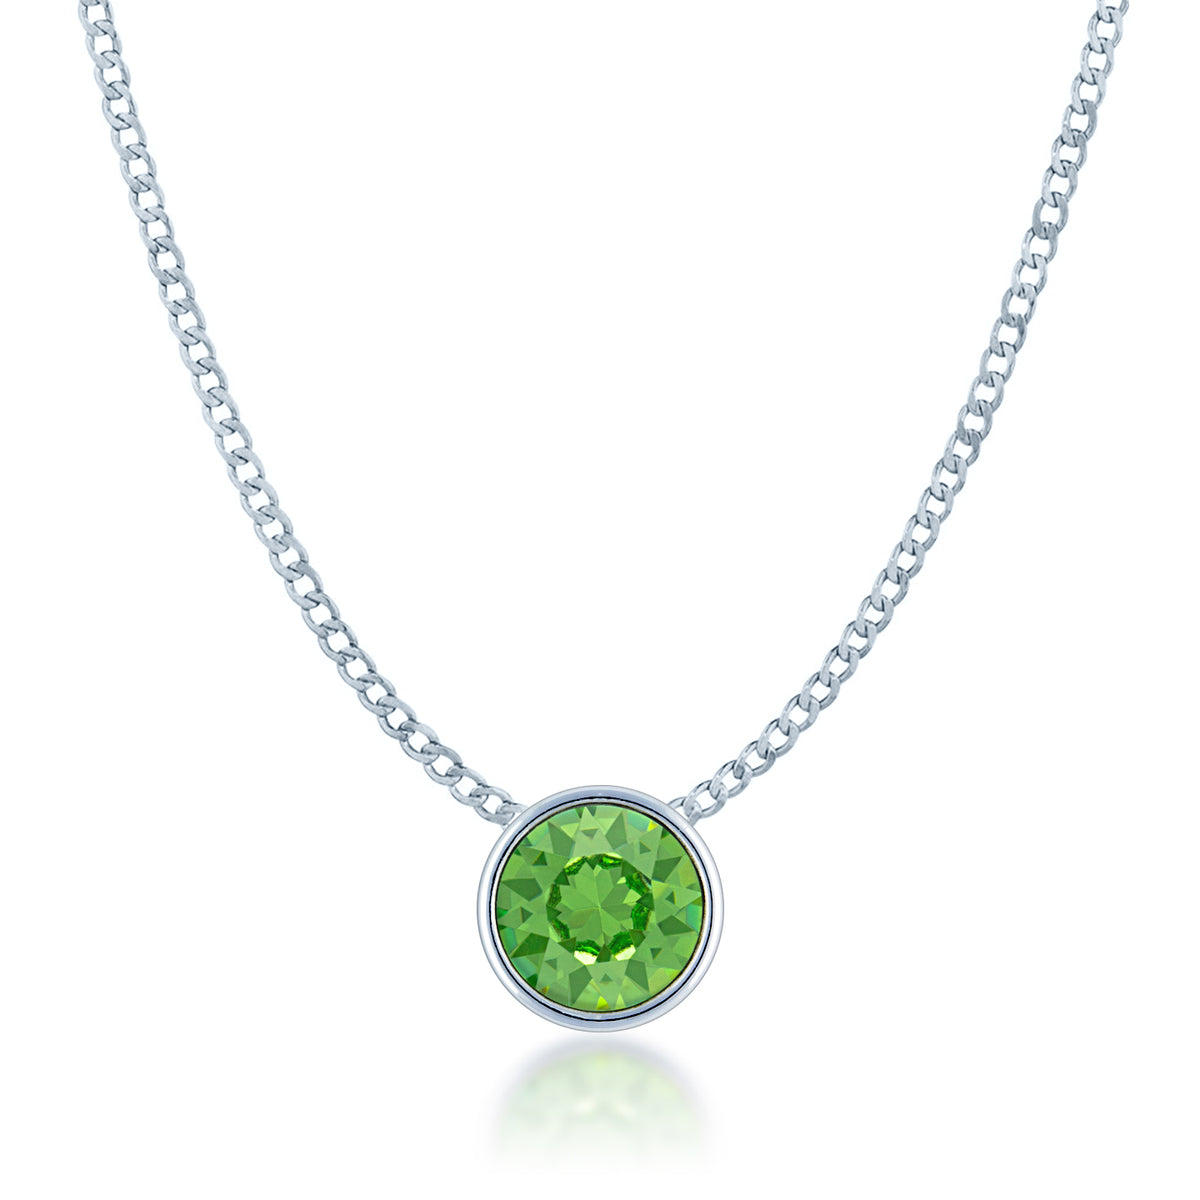 Harley Small Pendant Necklace with Green Peridot Round Crystals from Swarovski Silver Toned Rhodium Plated - Ed Heart